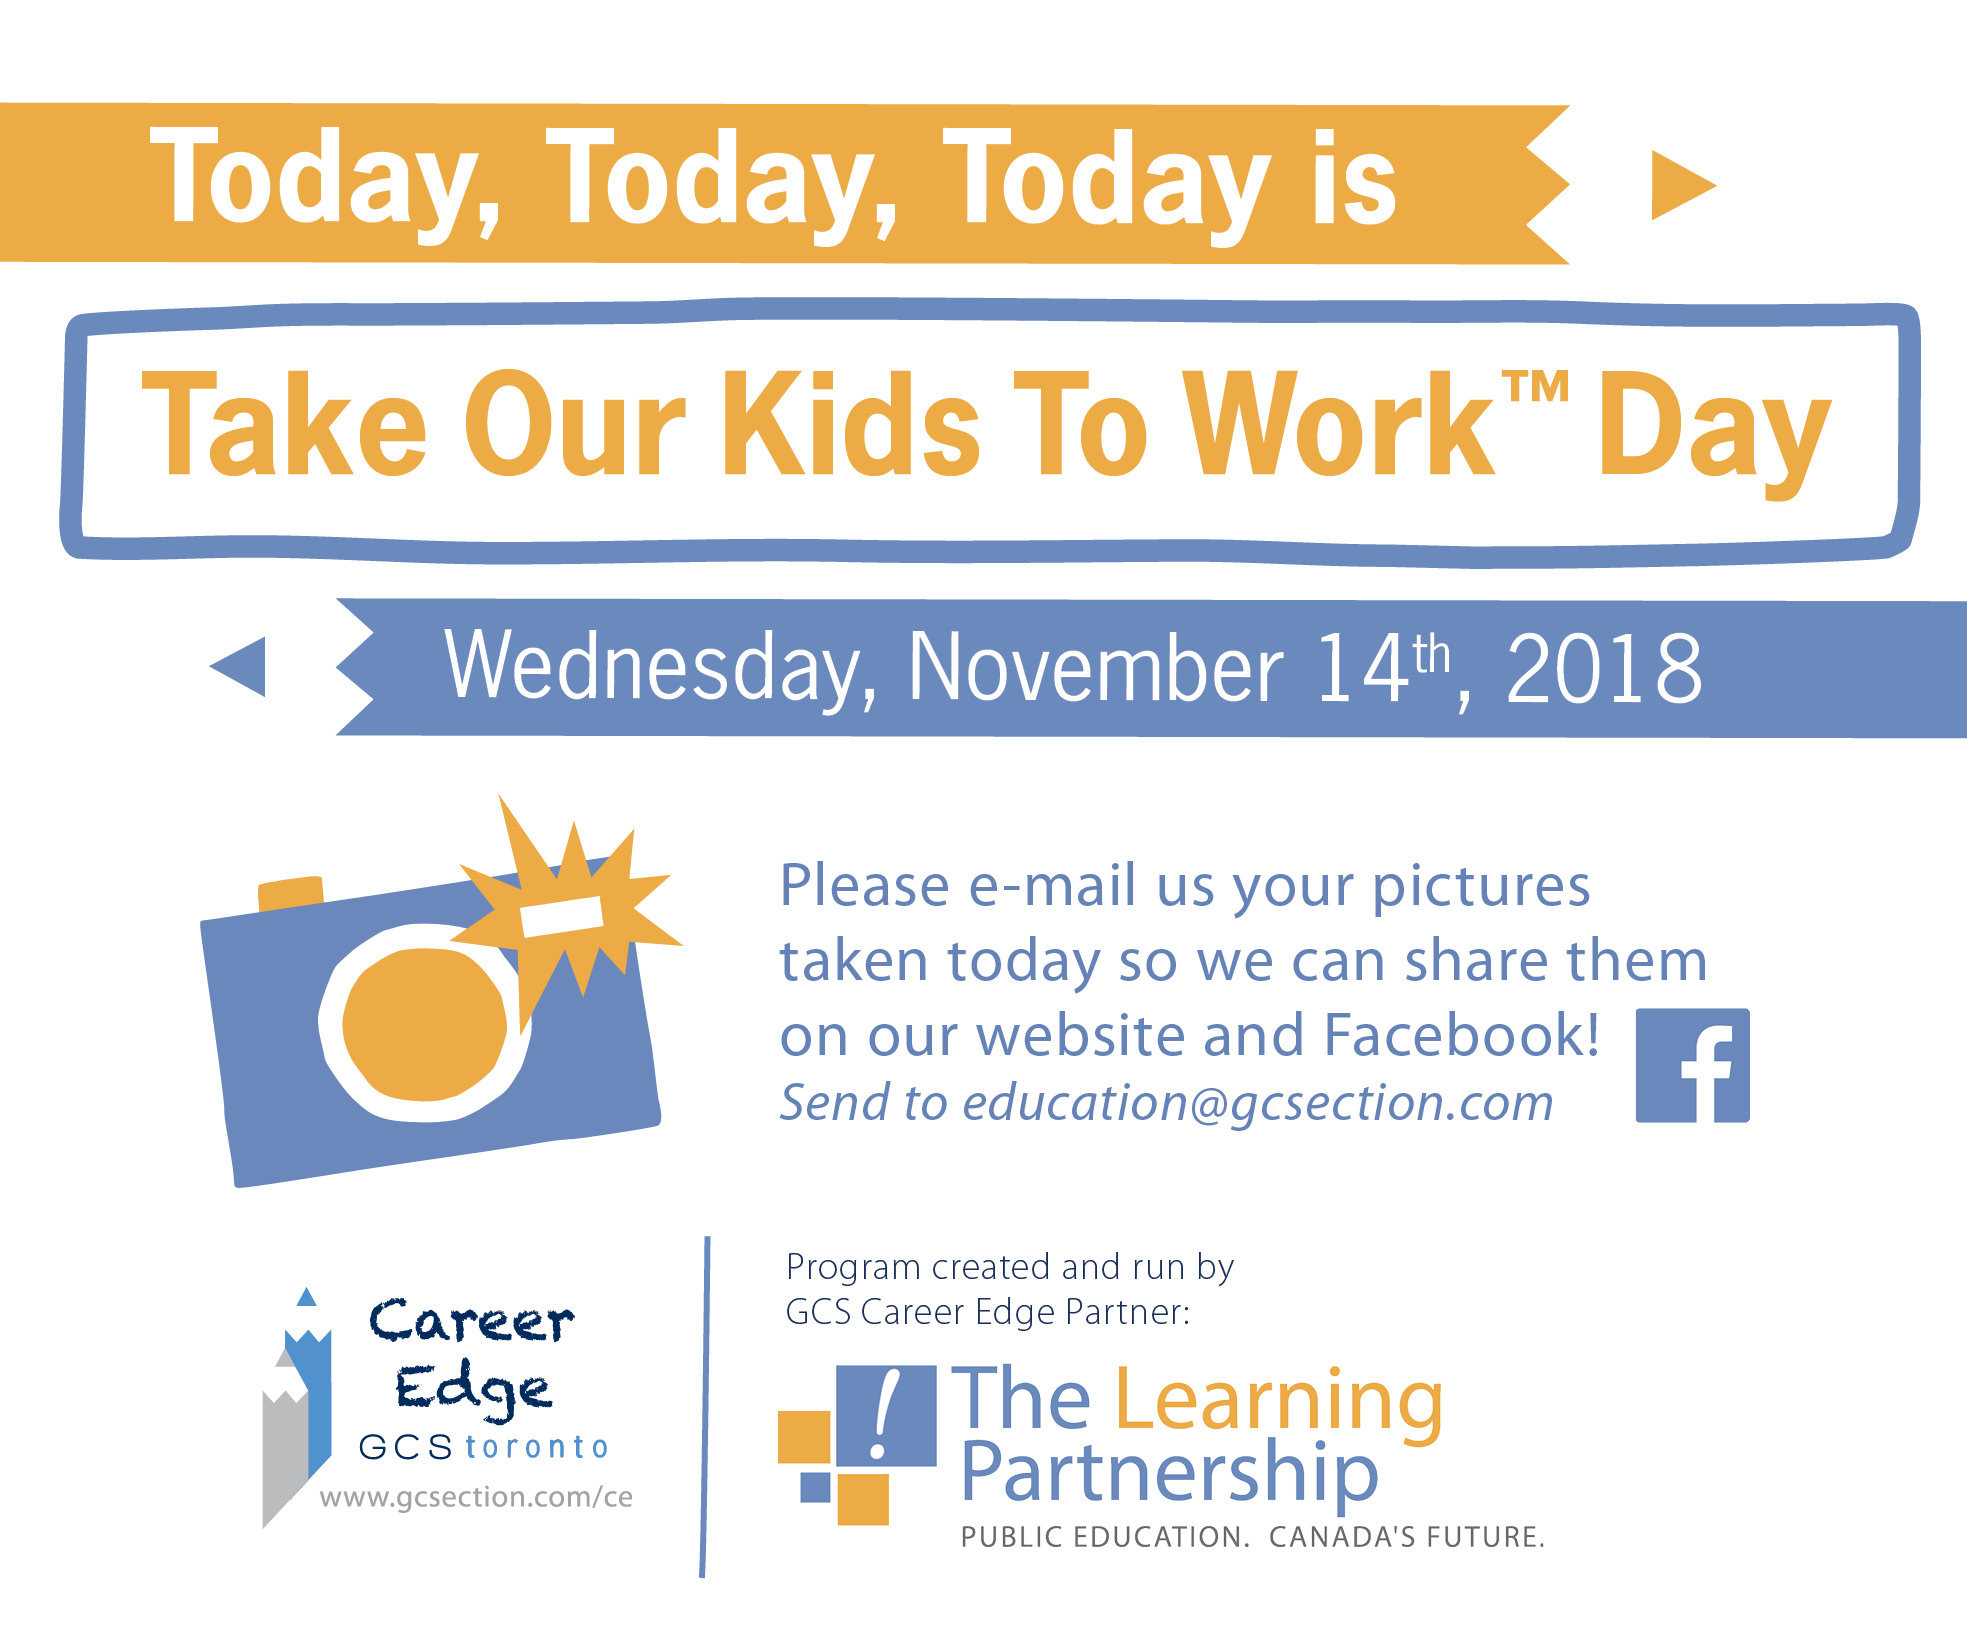 2018_tlp_take-our-kids-to-work-day_today